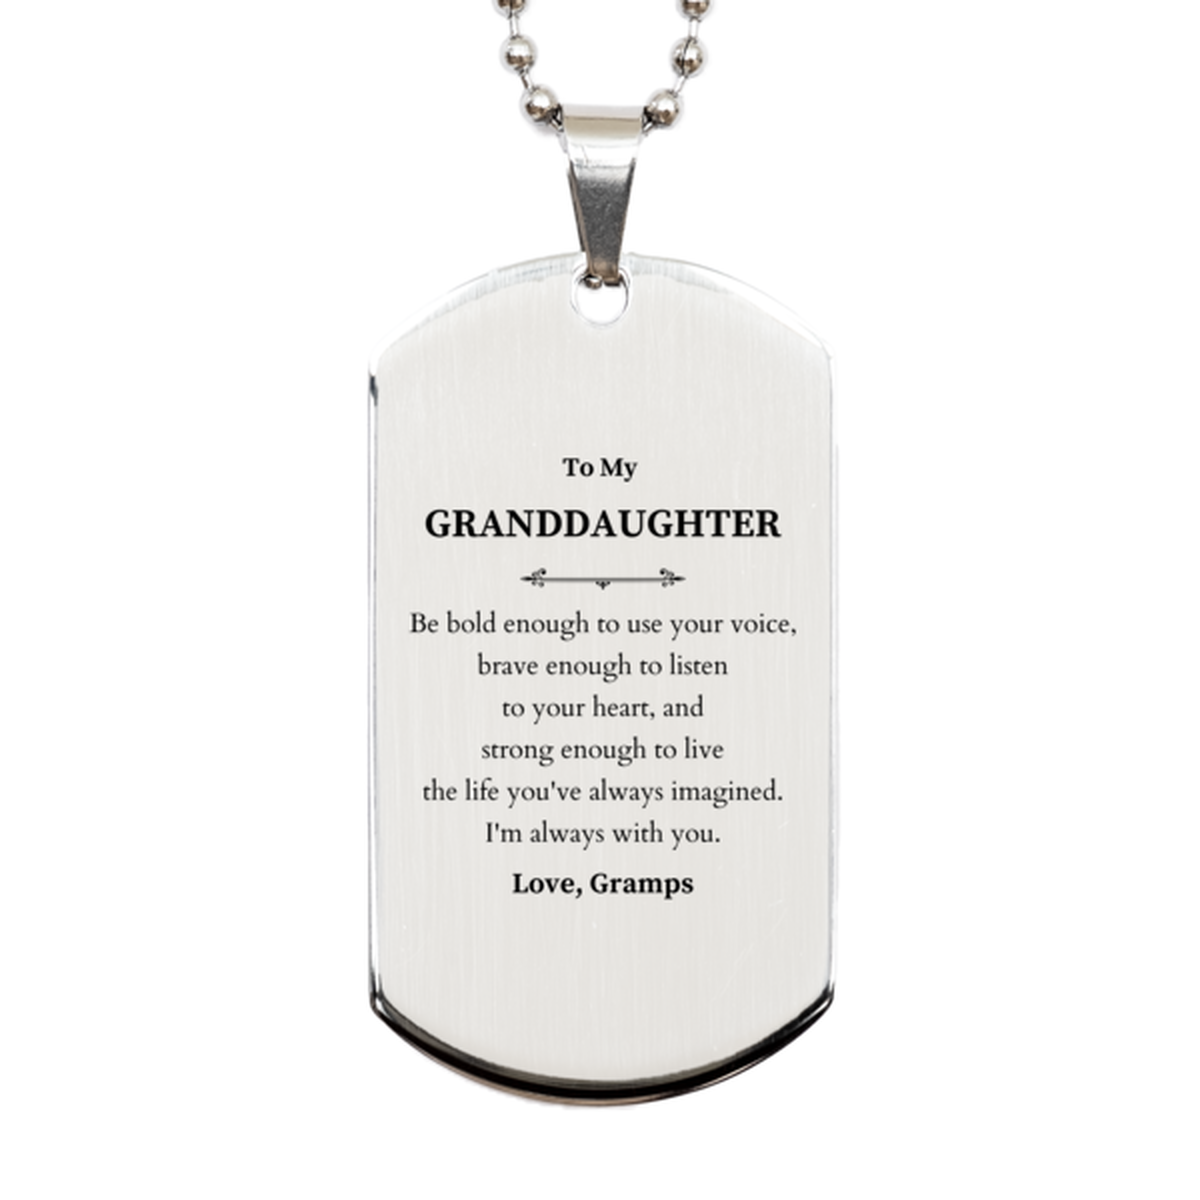 Keepsake Granddaughter Silver Dog Tag Gift Idea Graduation Christmas Birthday Granddaughter from Gramps, Granddaughter Be bold enough to use your voice, brave enough to listen to your heart. Love, Gramps